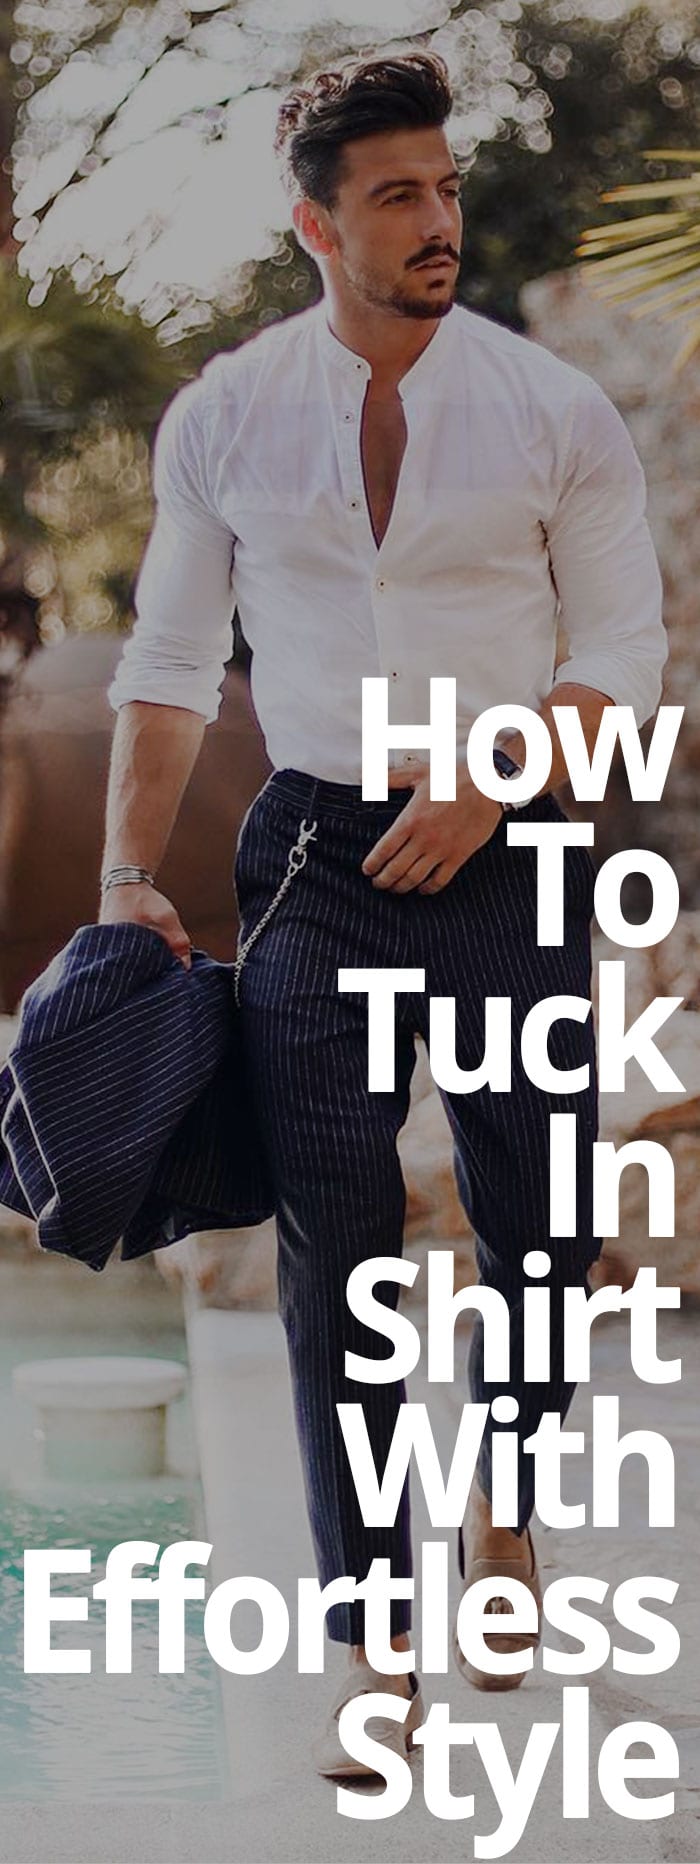 How To Tuck In Shirt With Effortless Style